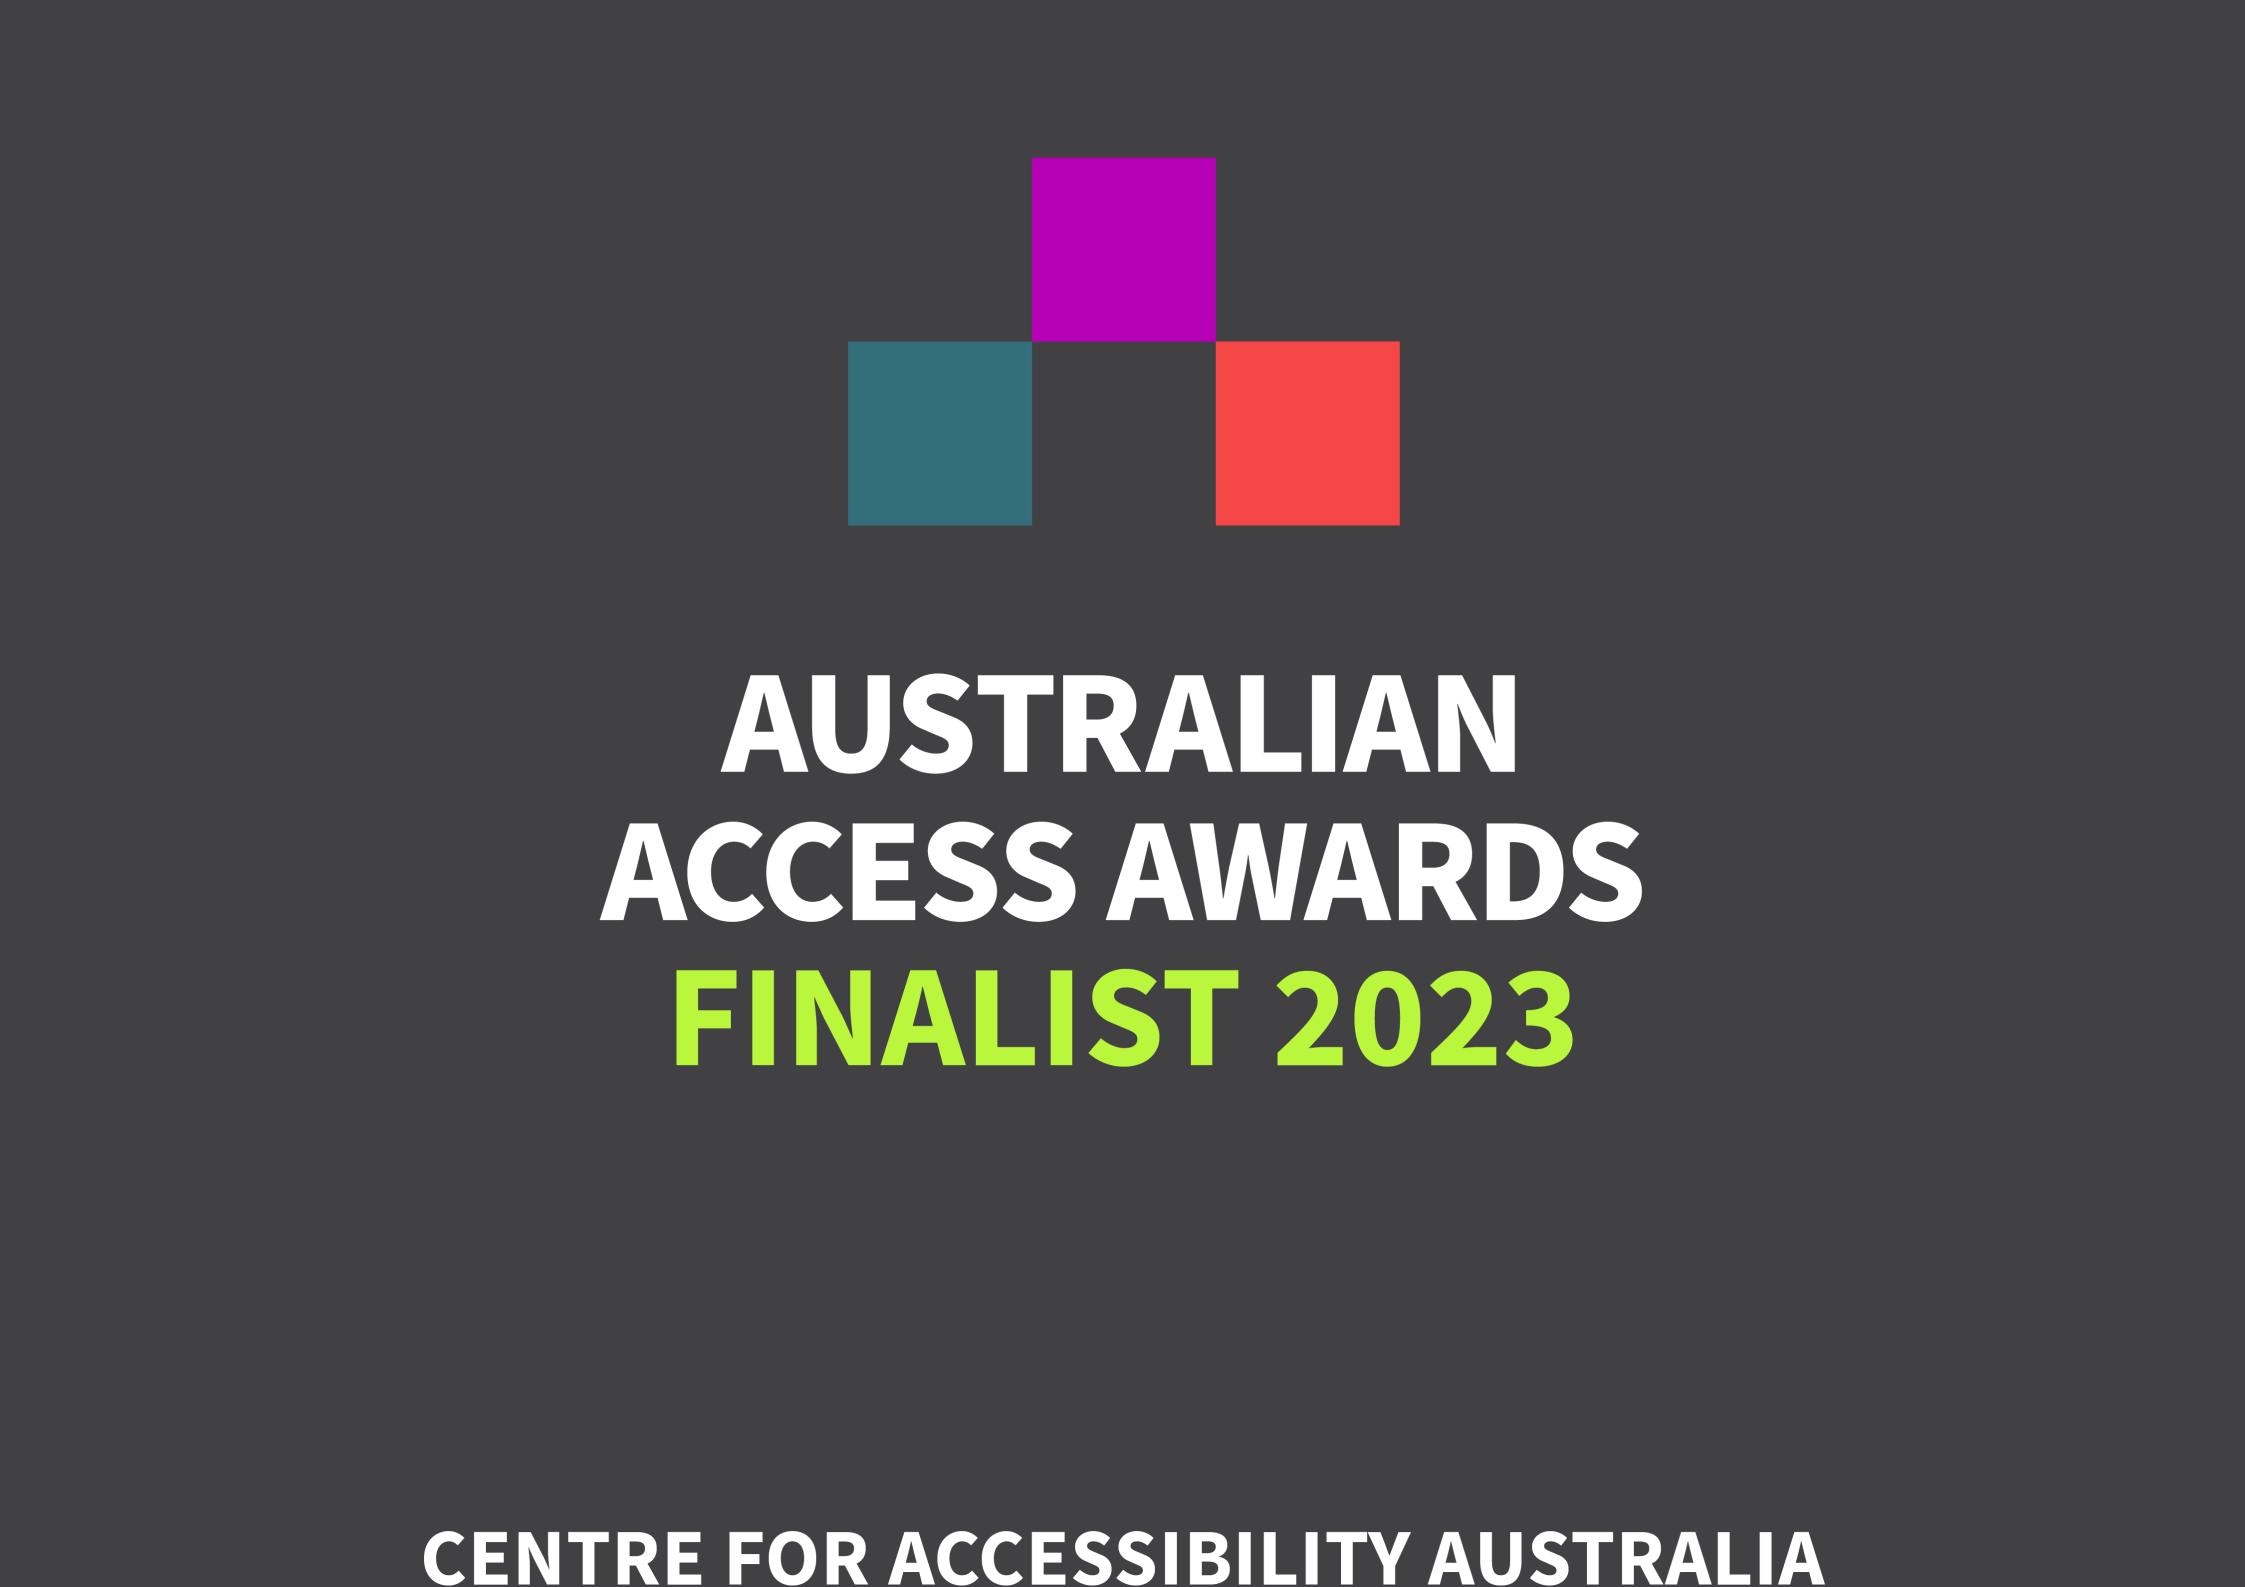 Image of coloured pixels above the texts 'Australian Access Awards Finalist 2023' by Centre for Accessibility Australia.